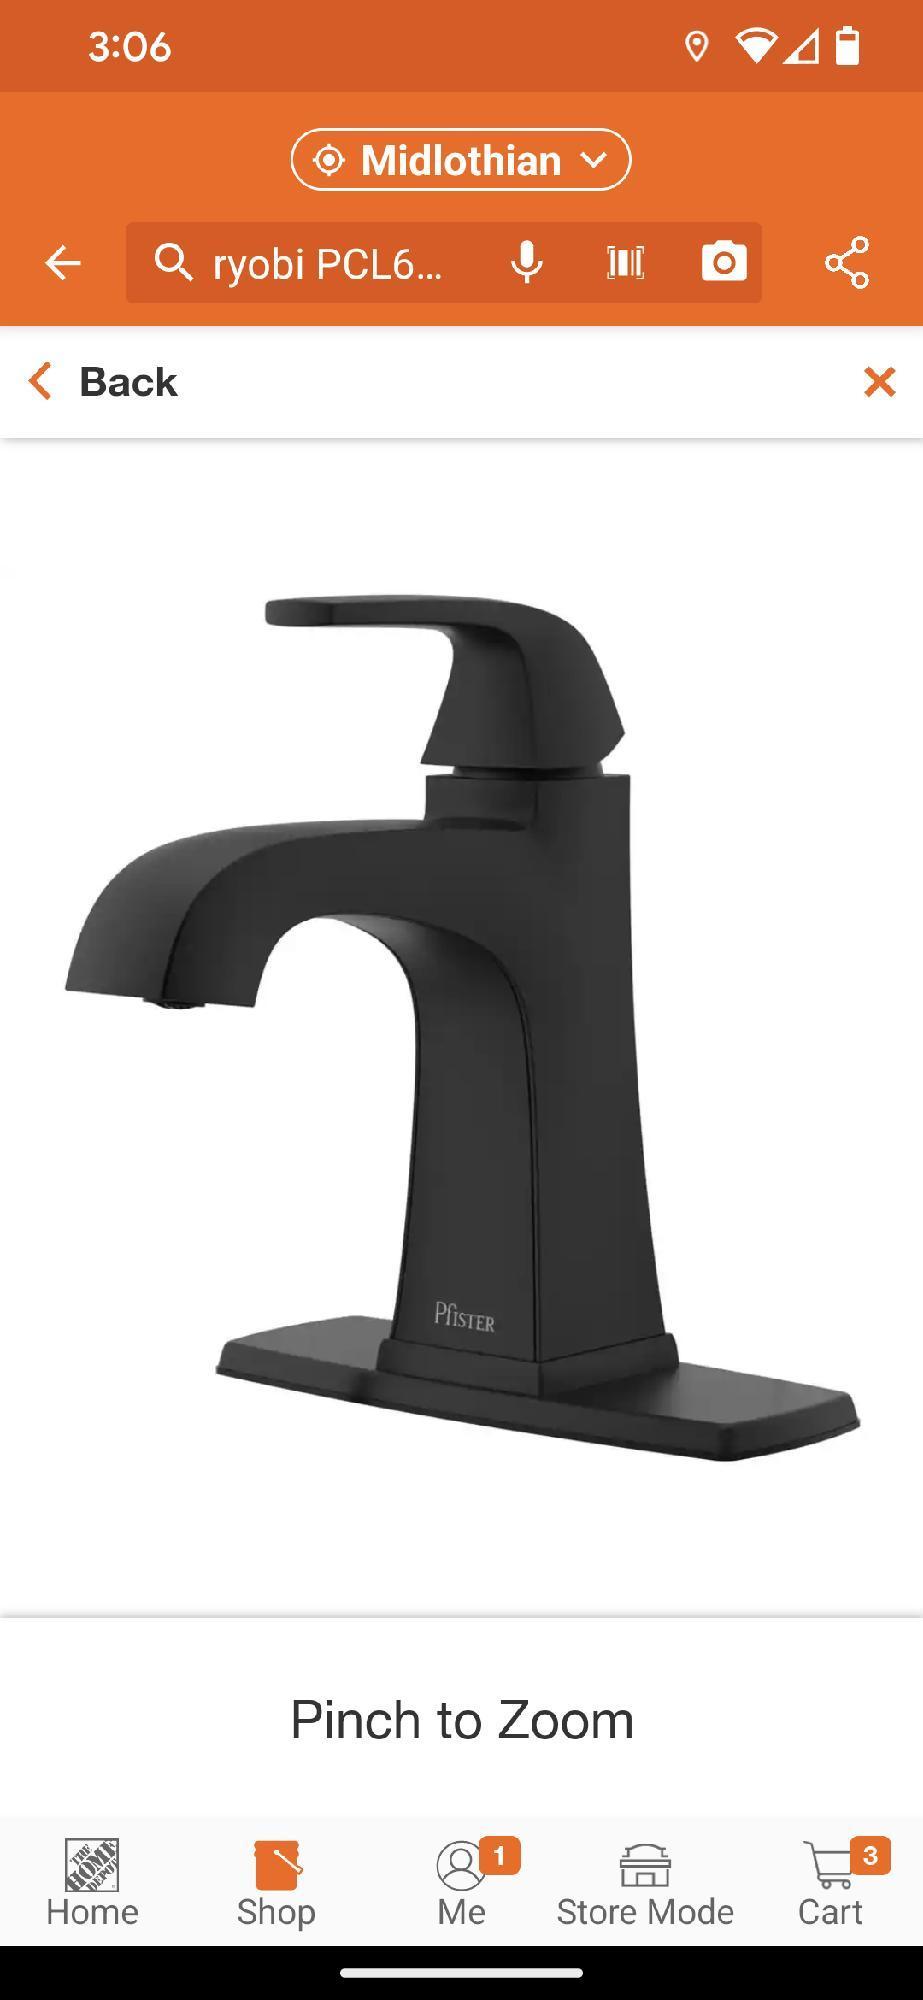 Pfister Bellance Single Handle Single Hole Bathroom Faucet with Drain Kit and Deckplate included in